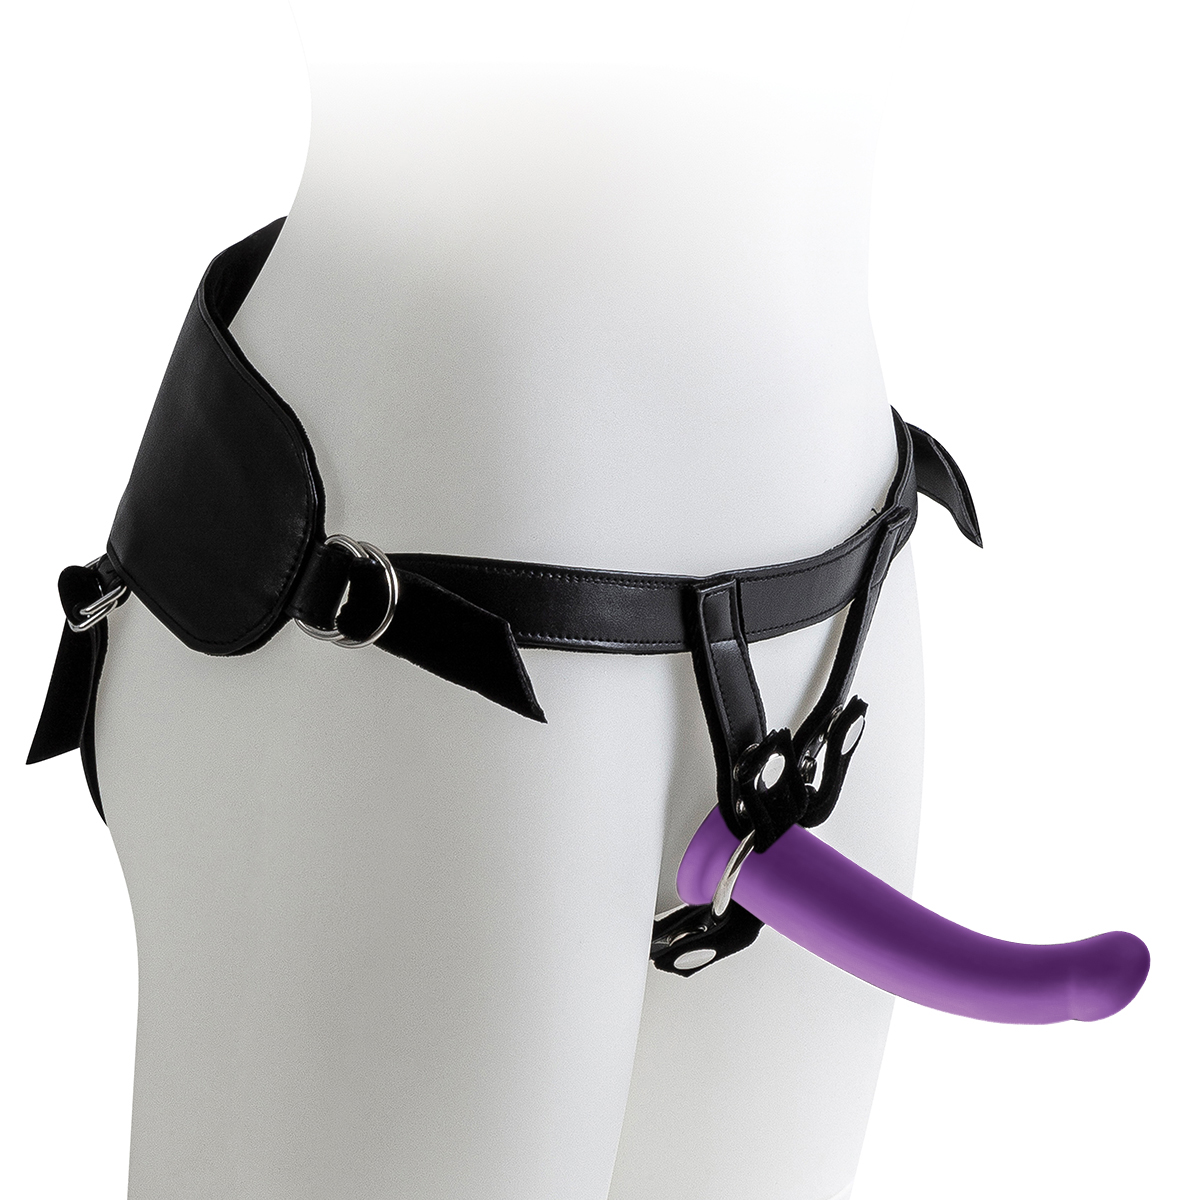 Harness with Purple Dildo – Size M